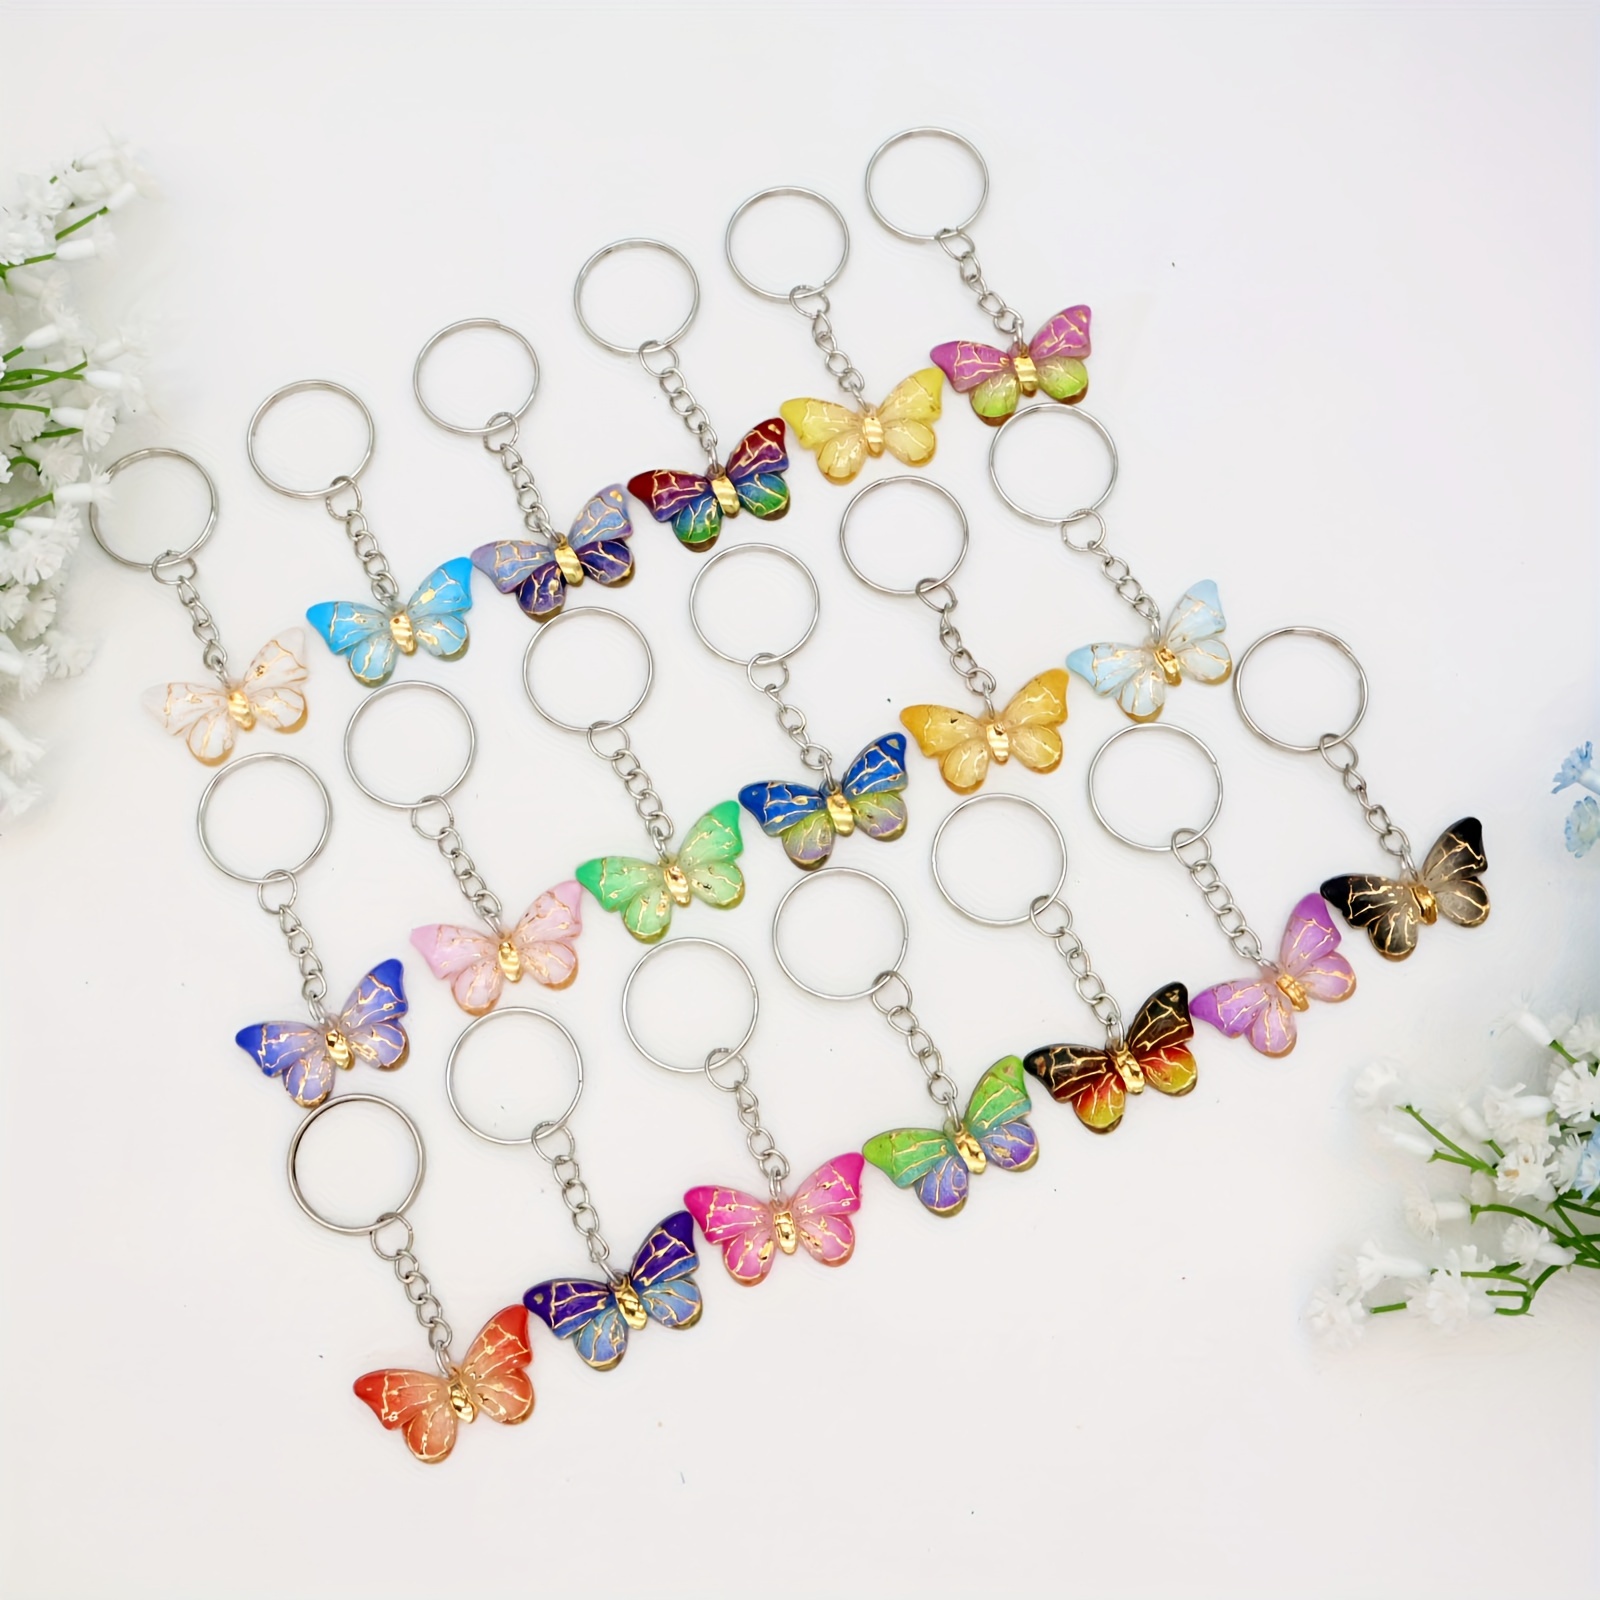 

12-pack Assorted Butterfly Keychains, Acrylic Cute Butterfly Key Rings, Fashionable Simple Charm Pendants For Party Favors And Gifts